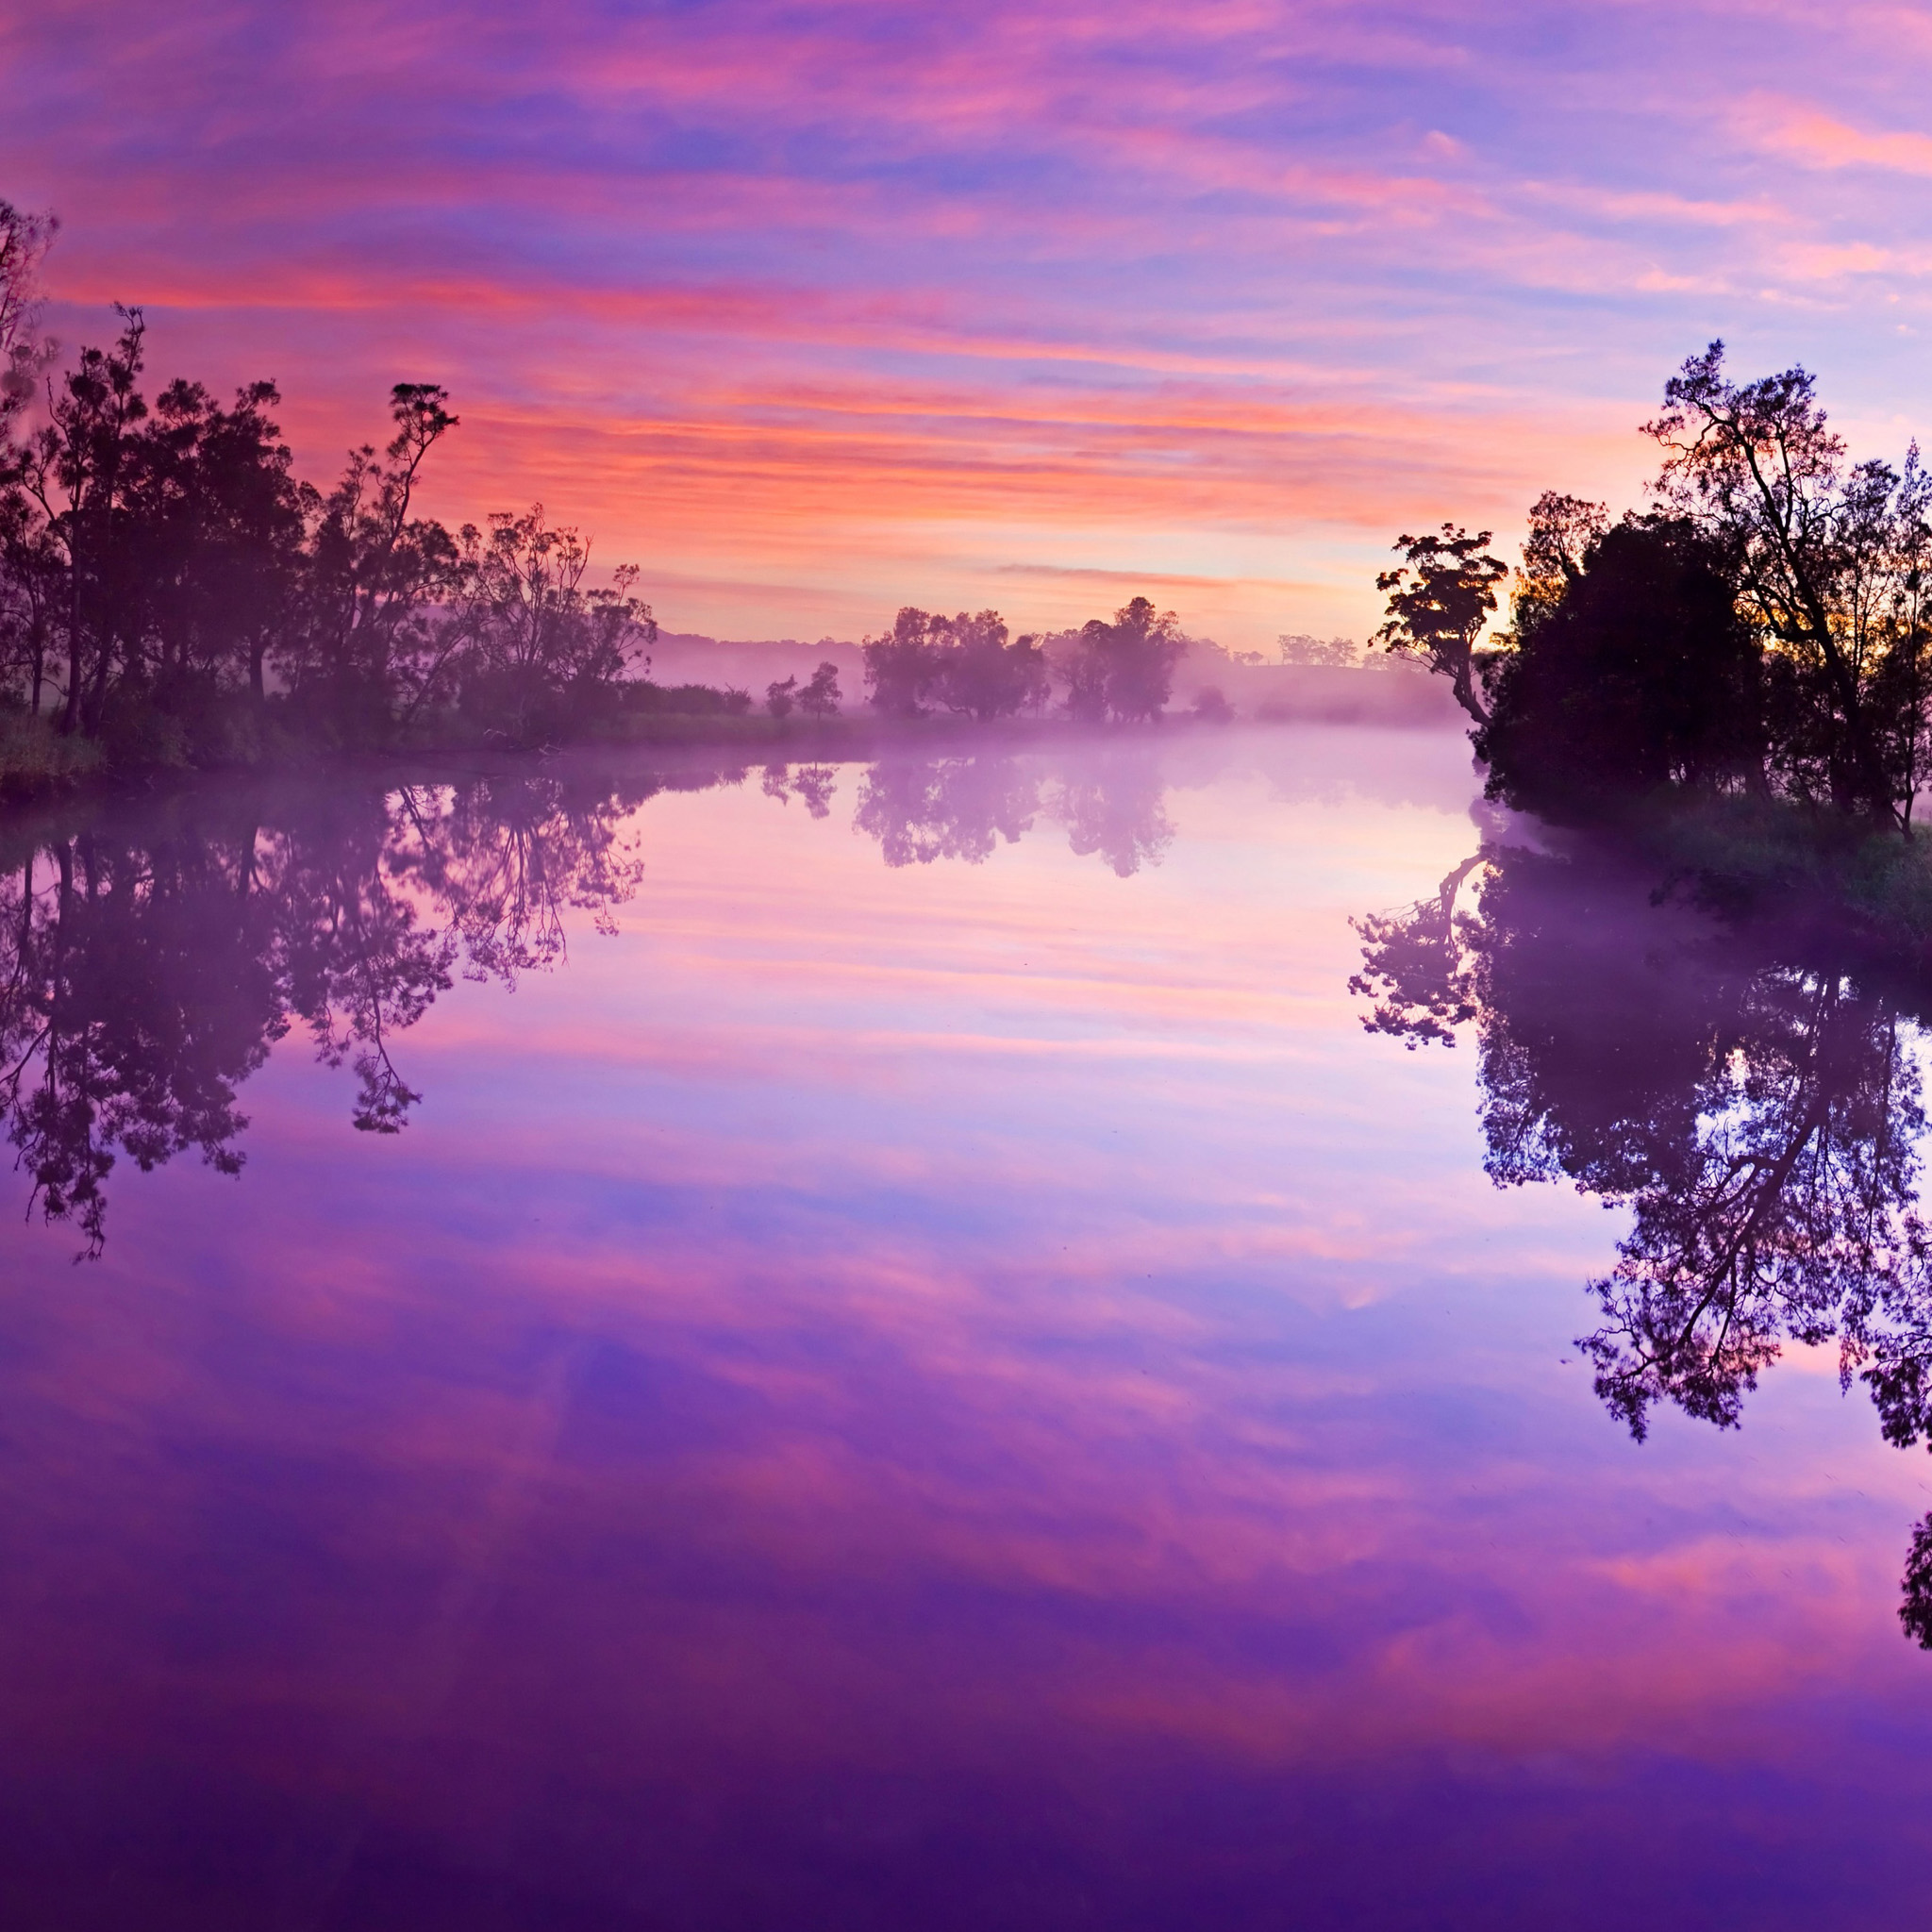 pretty wallpapers for ipad,sky,natural landscape,nature,reflection,purple